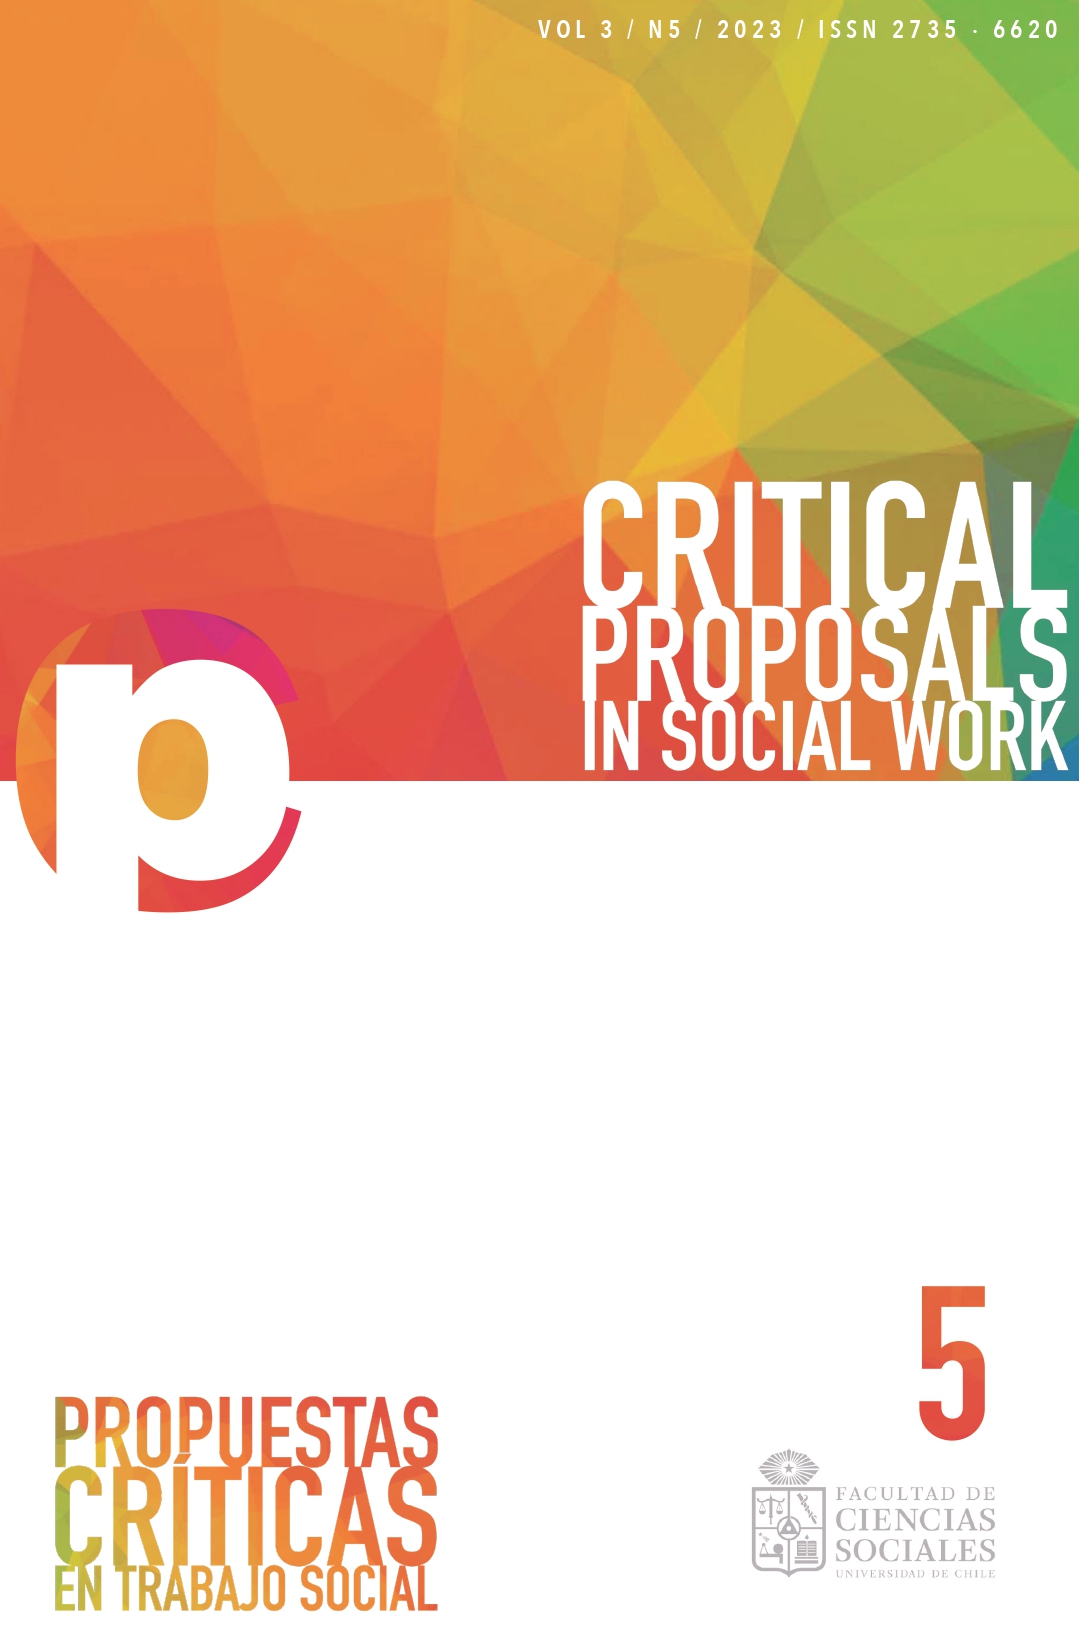 							View Vol. 3 No. 5 (2023): Critical Proposal in Social Work
						